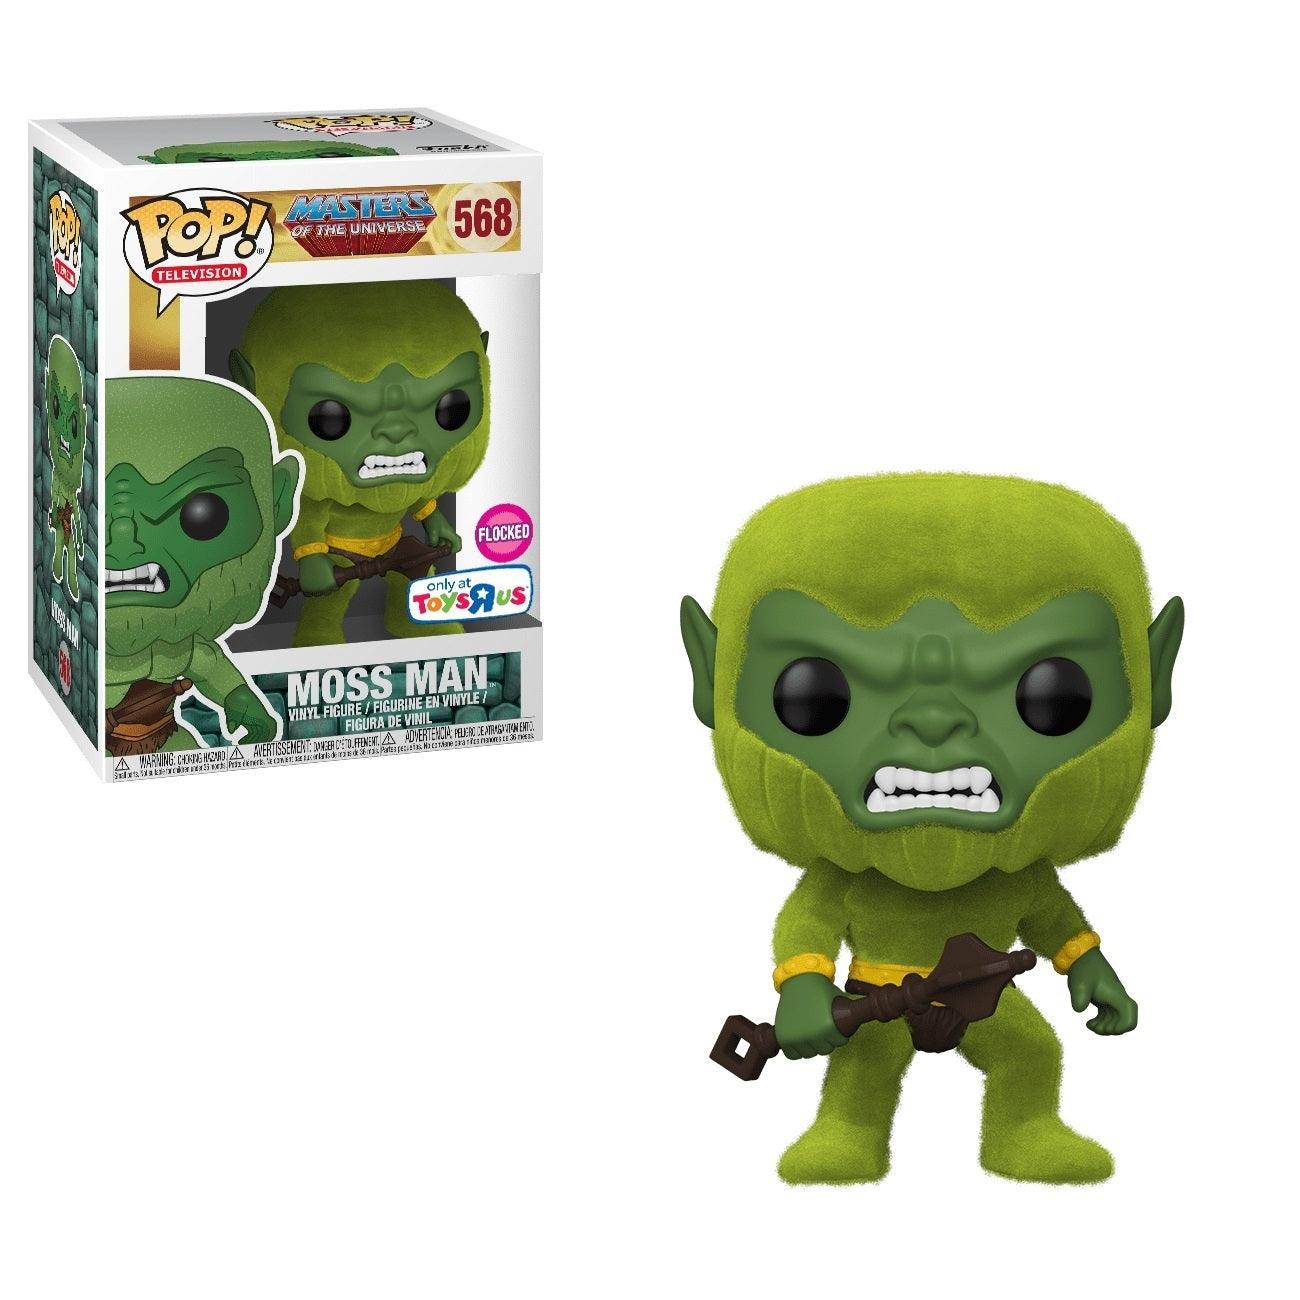 Pop! Television - Master Of The Universe (MOTU) - Moss Man - #568 - FLOCKED & Toys "R" Us EXCLUSIVE - Hobby Champion Inc